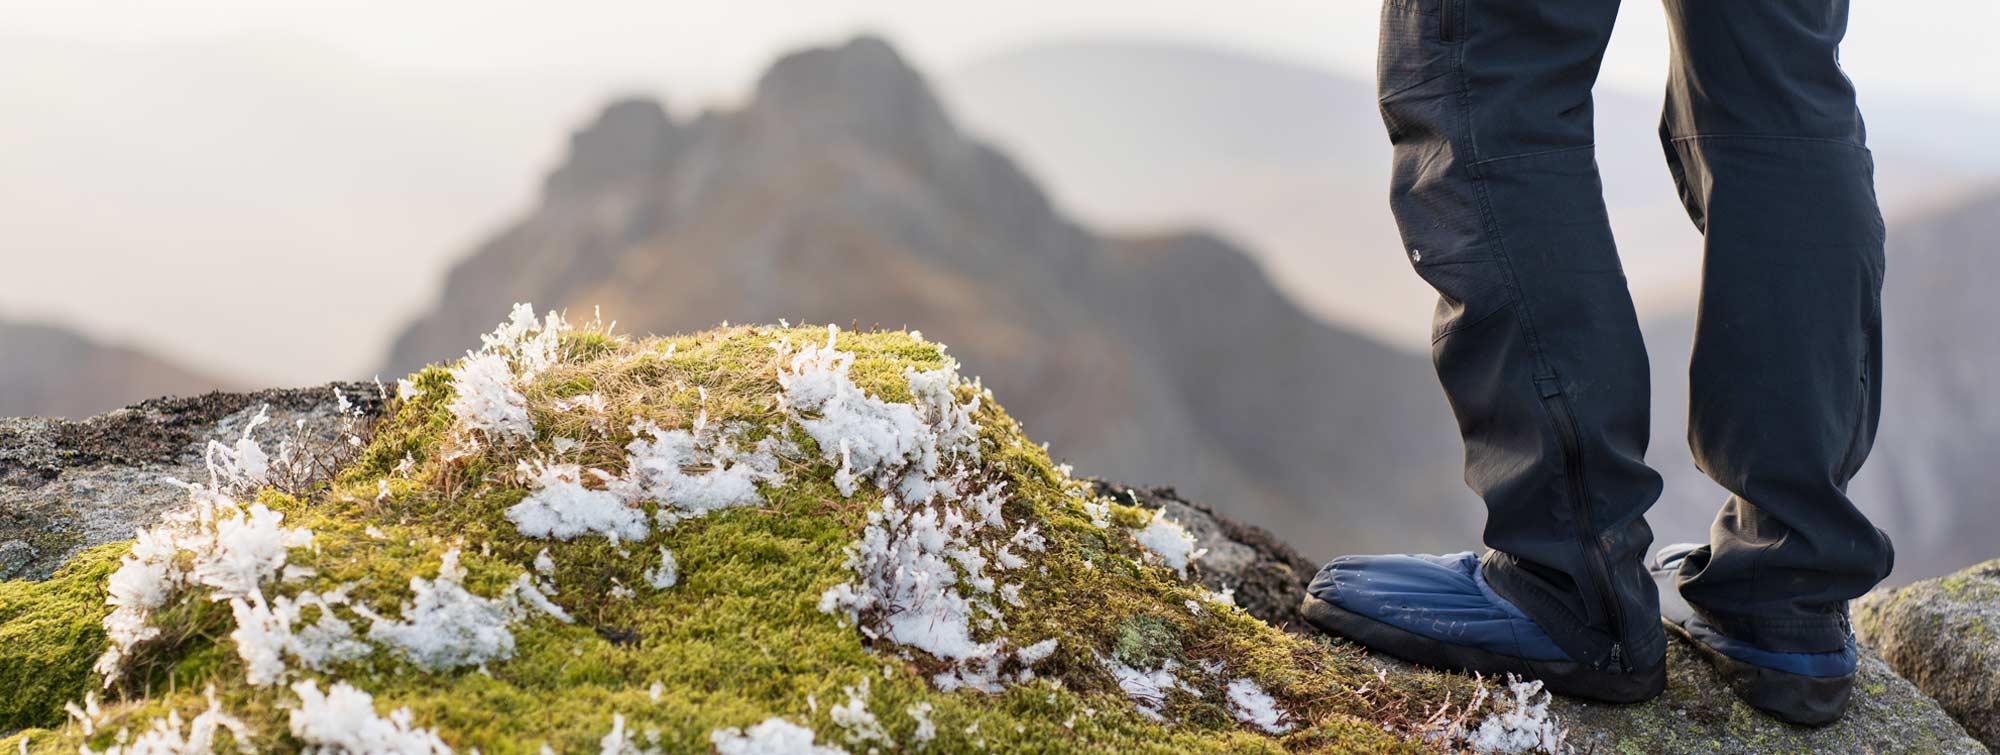 Exped Camp Slipper Review - “The Exped Camp Slipper fits a great ...